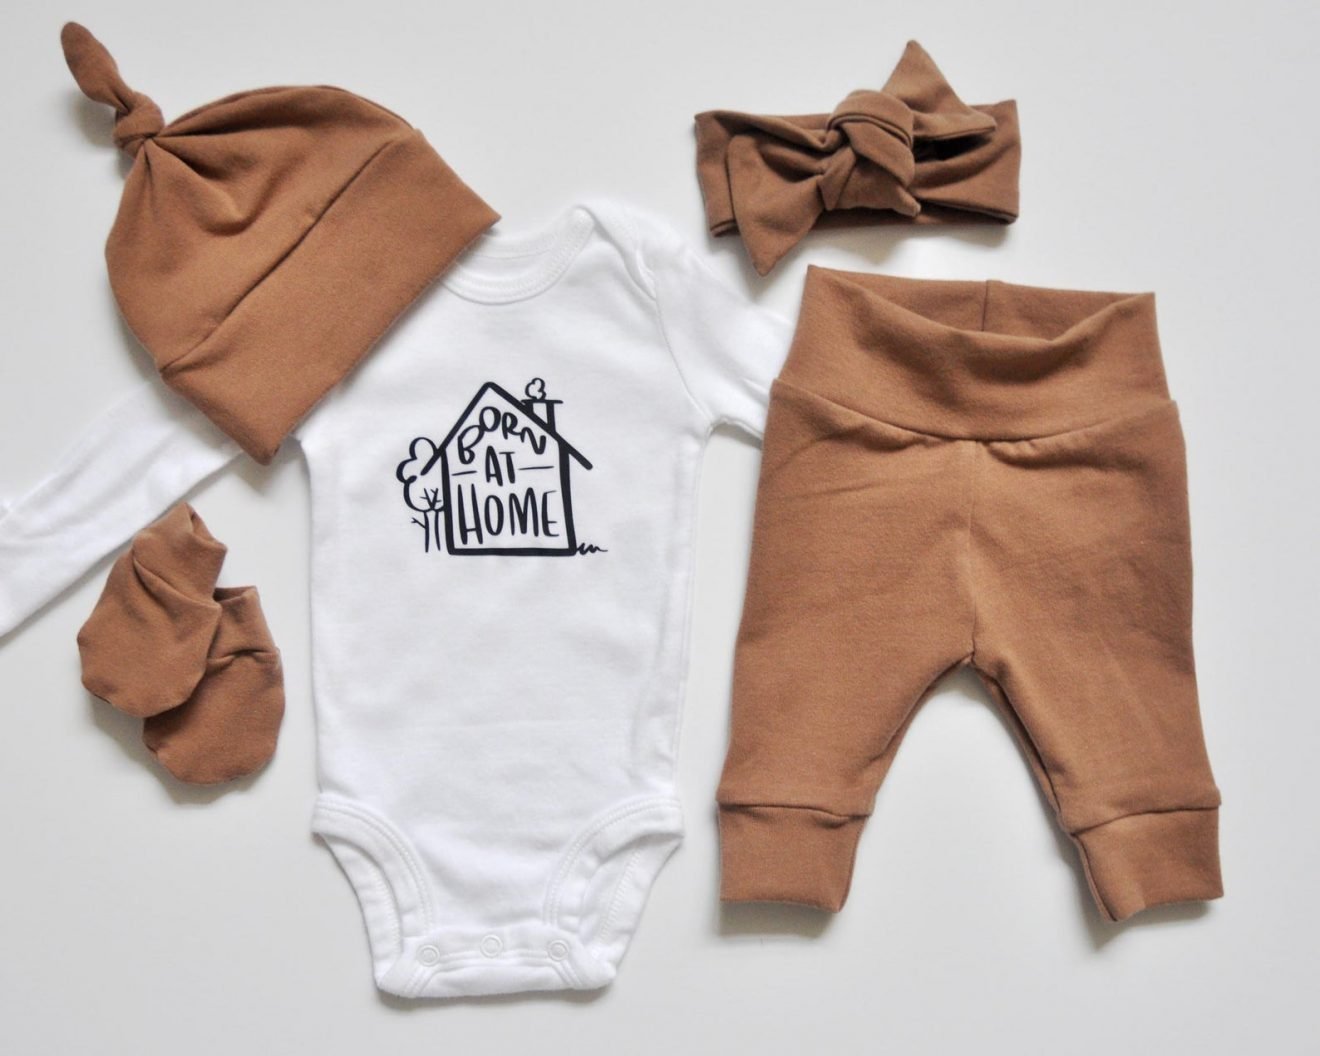 The Young Nest Shop on Etsy | Neutral Baby Clothes, Born at Home Onesie, Newborn Coming Home Outfit, Gender Neutral Infant Outfit, Baby Shower Gift